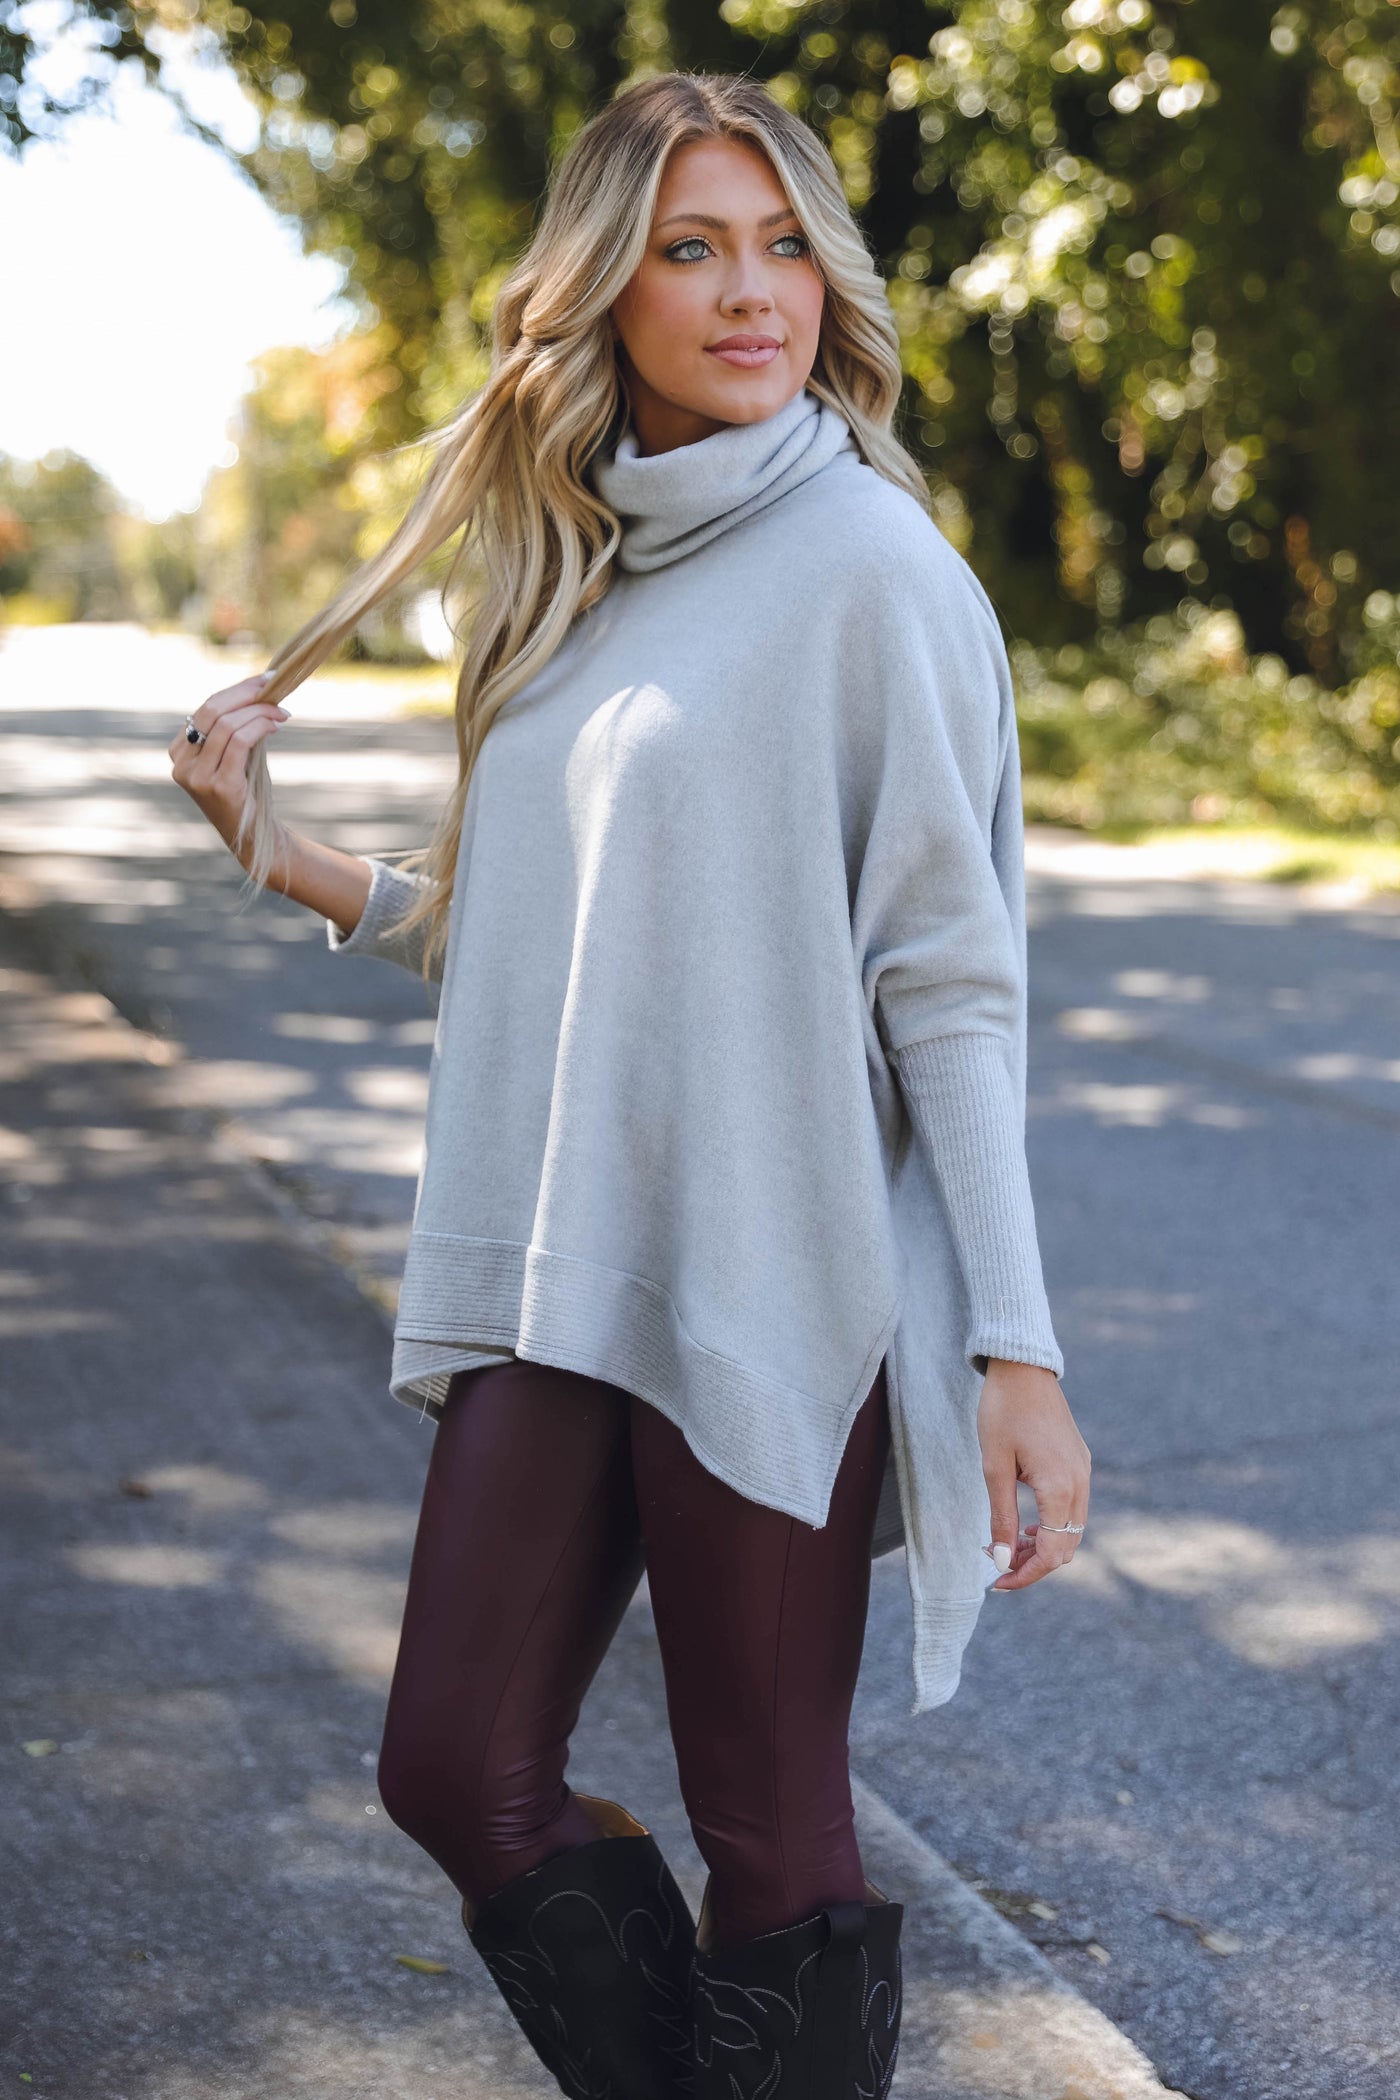 Comfy Grey Cowl Neck Sweater- Cute Oversized Sweater- Cherish Cowl Neck Sweater